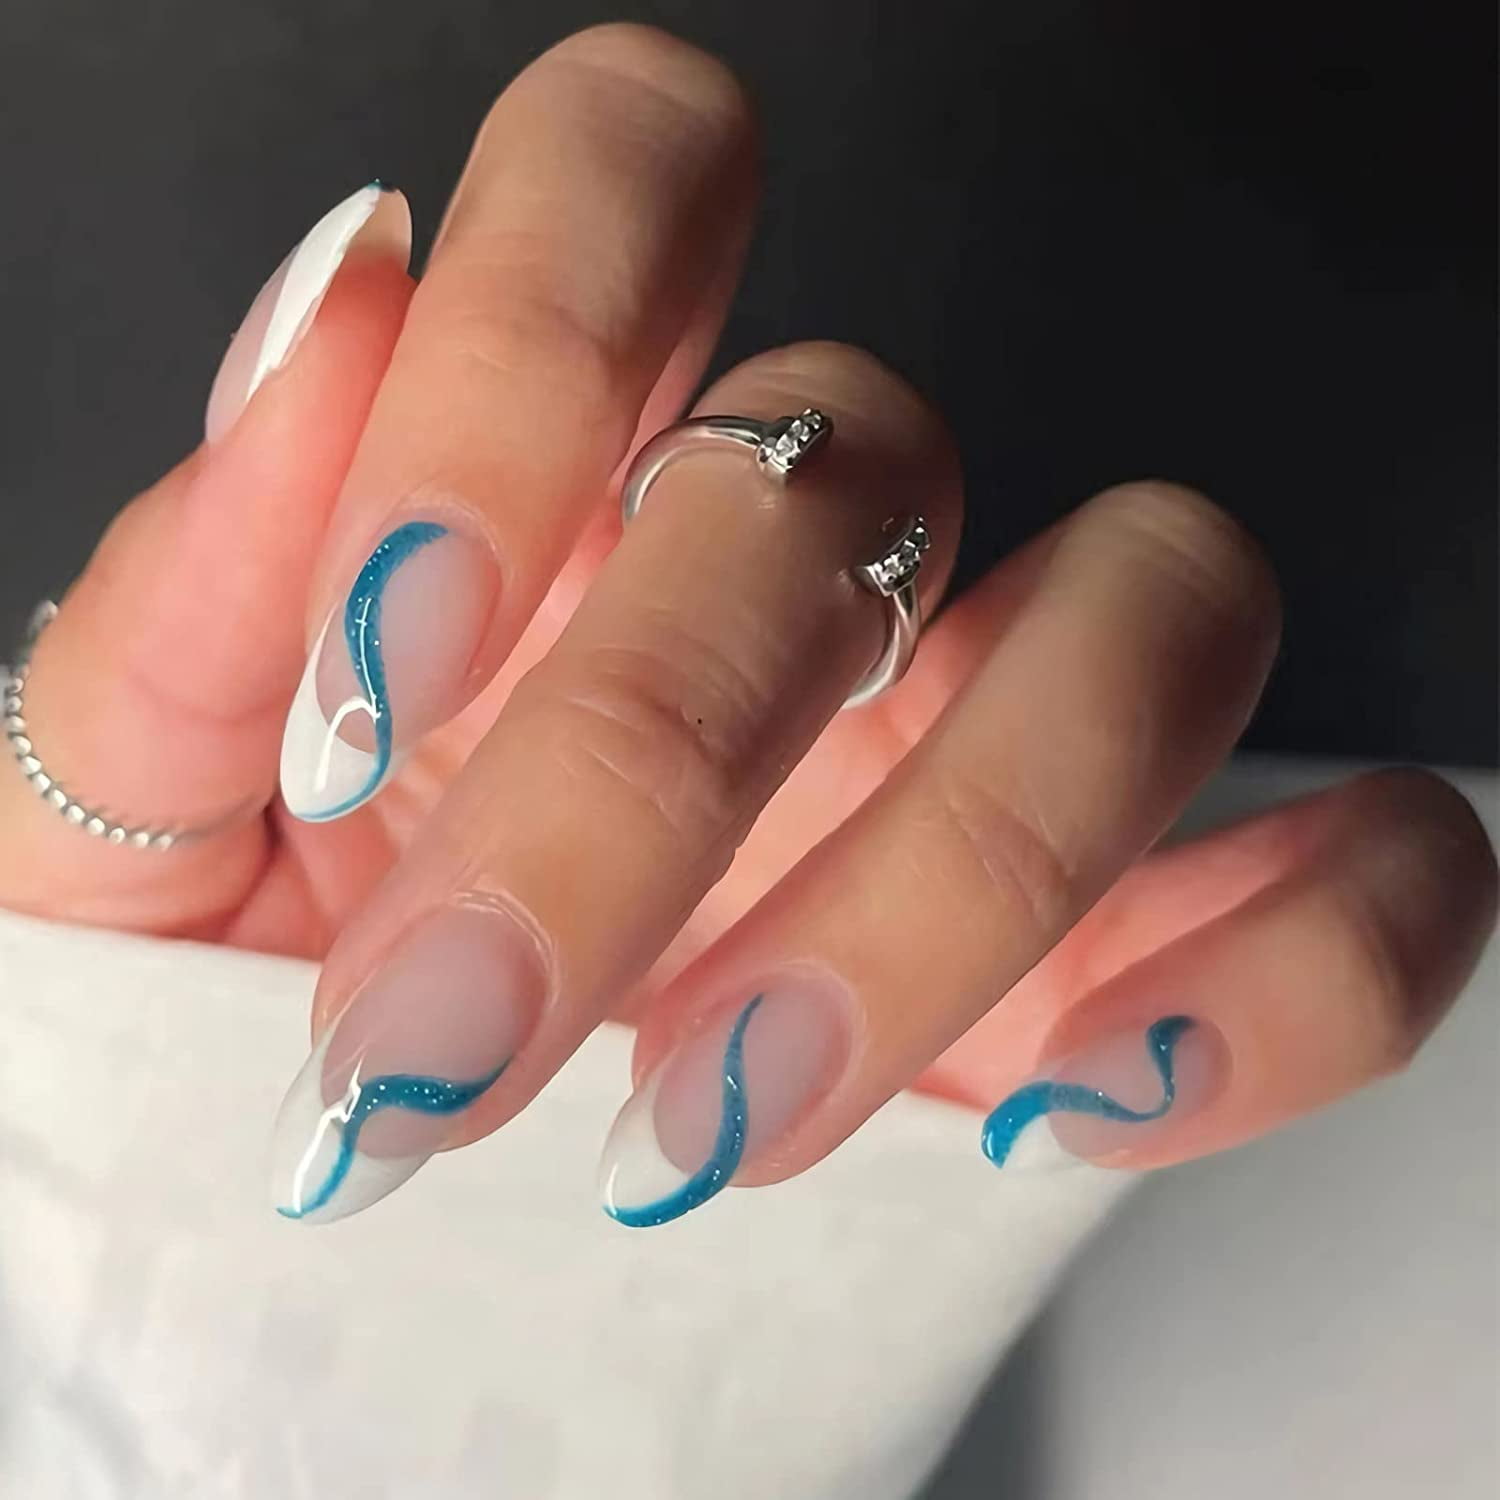 Glossy Blue Stripe Fake Nails with White French Tip Designs, Almond Shaped  Press on Nails Medium Full Cover Glue on Nails Water Drop Type Acrylic Nails  for Women Girls, 24Pcs 